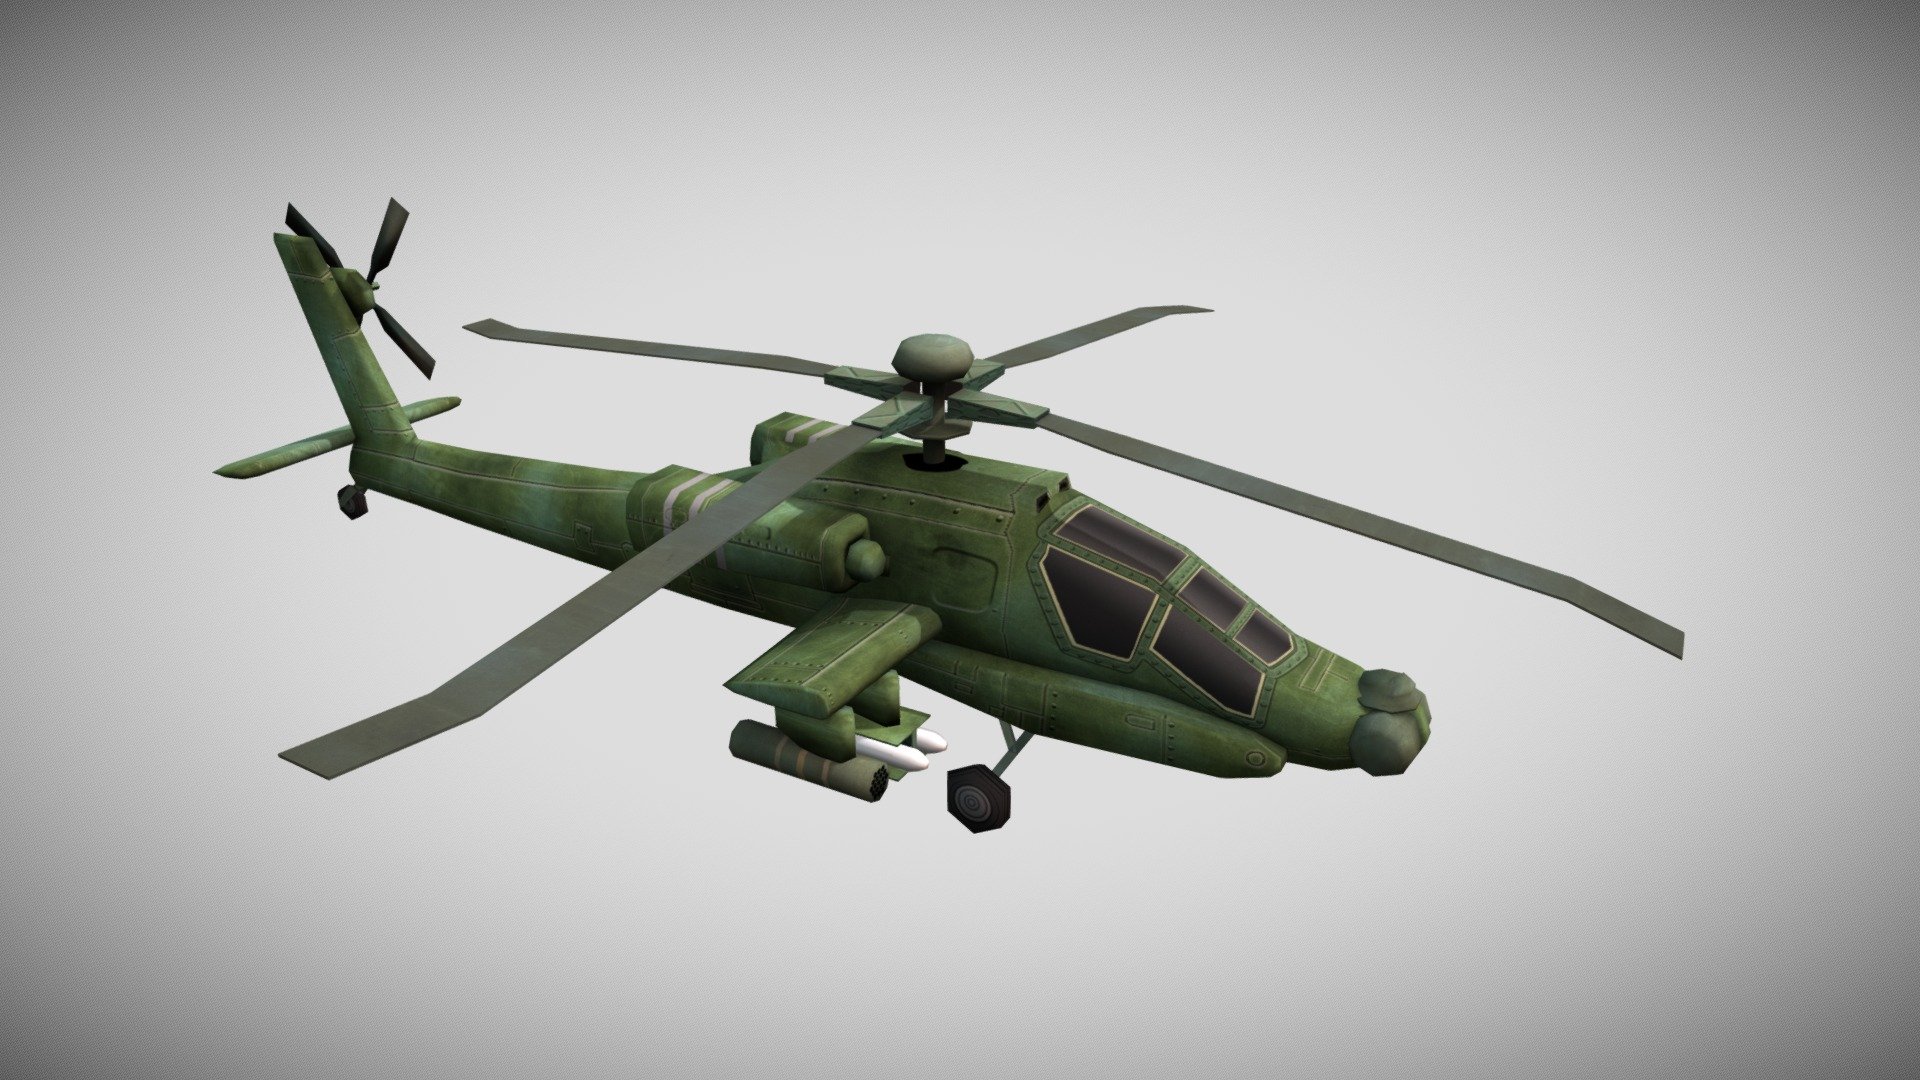 A stylized, low poly helicopter based off the legendary Apache! The colorful texture and optimized geometry makes it perfect for casual or mobile games. This will be available for sale in the near future, so keep an eye on this page 3d model